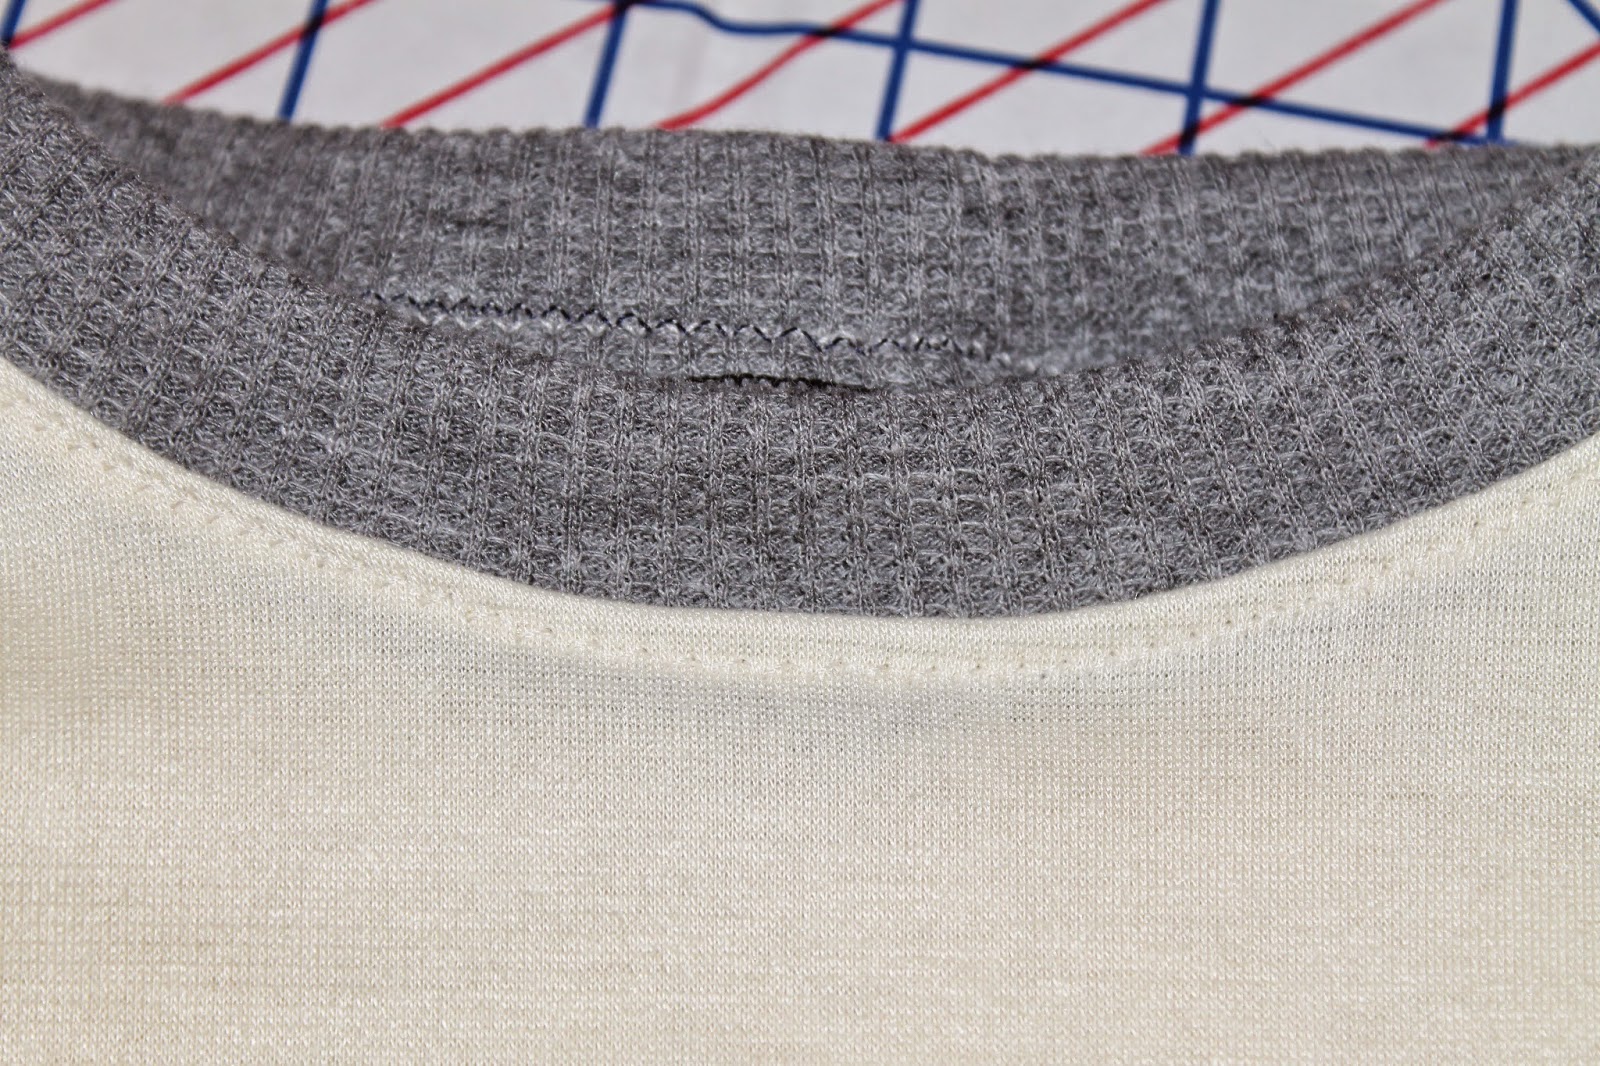 Seamingly Smitten: Tutorial: How to sew a knit dress with pockets